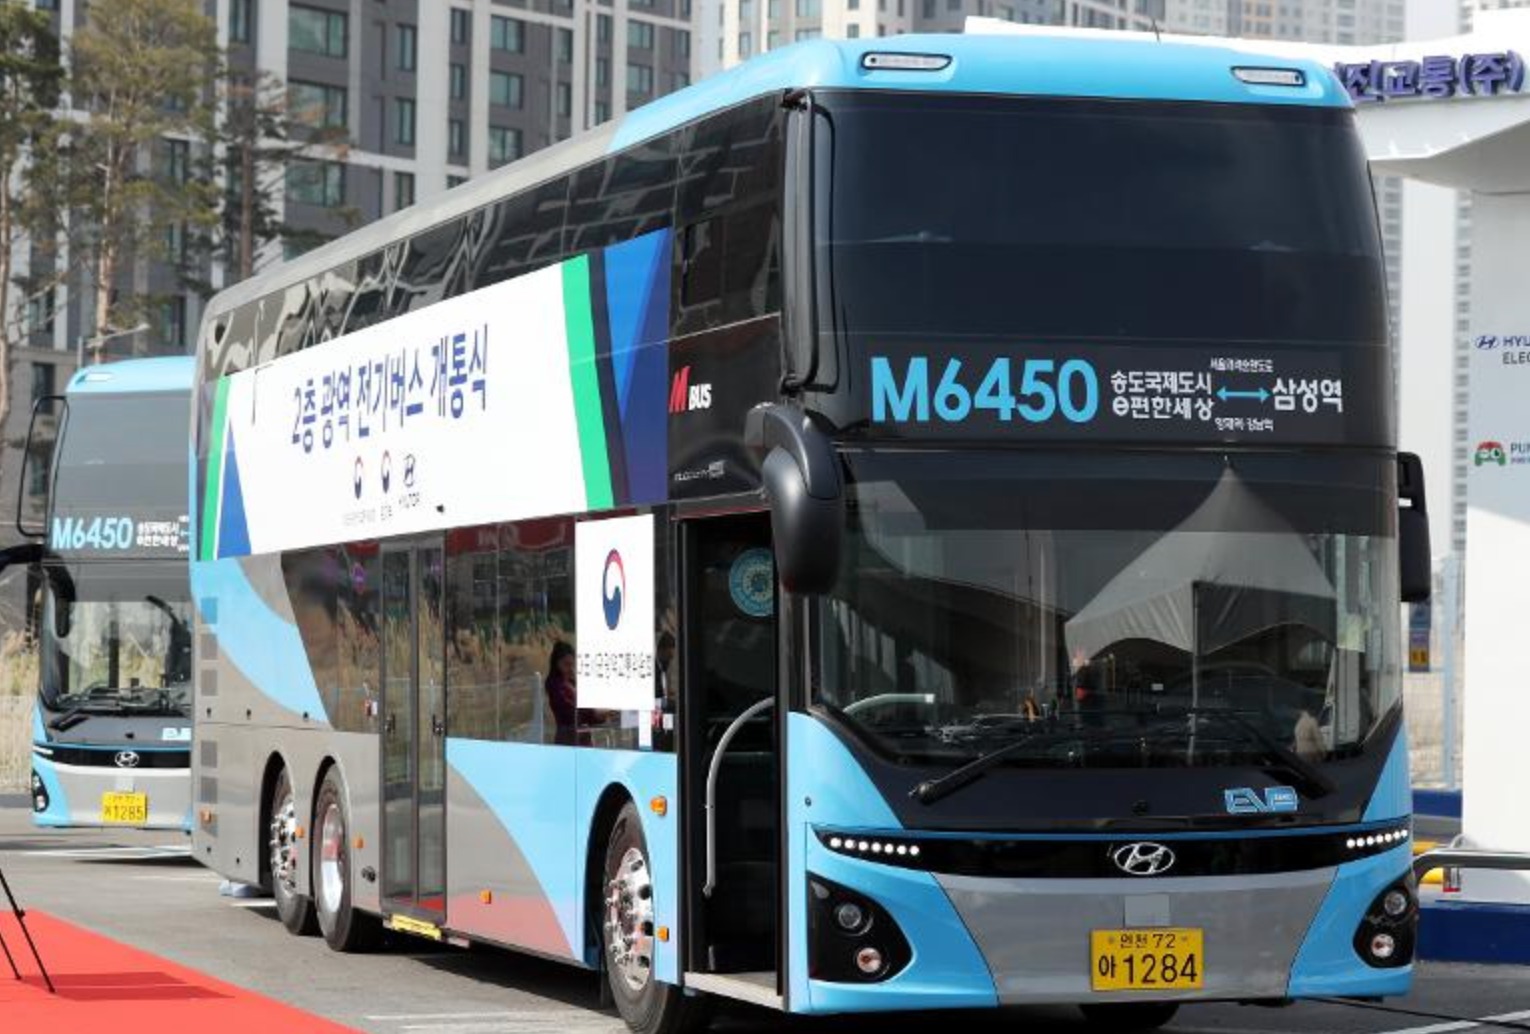 Green Transport: Marrakesh to receive 20 electric buses from South Korea